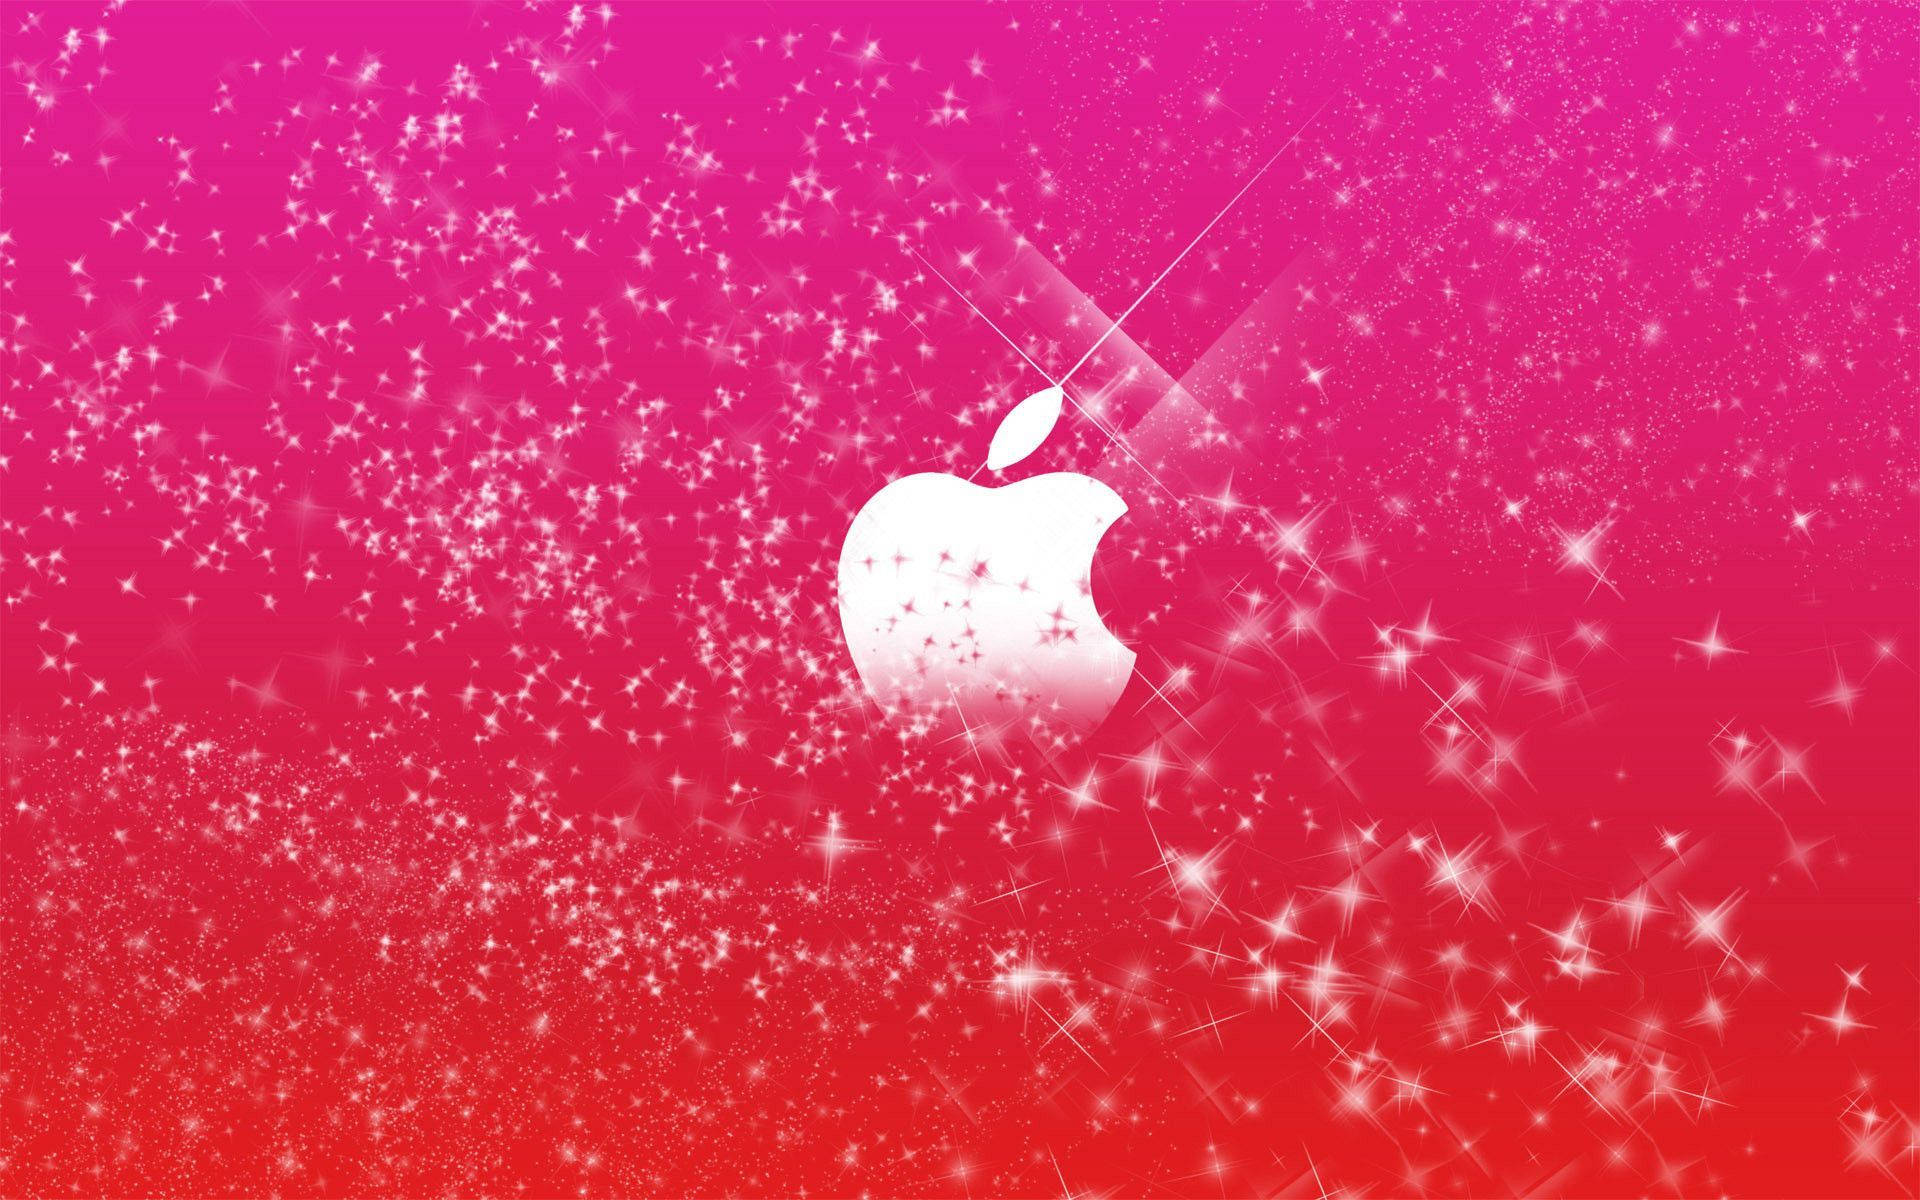 Aesthetic Girly Version Of Apple